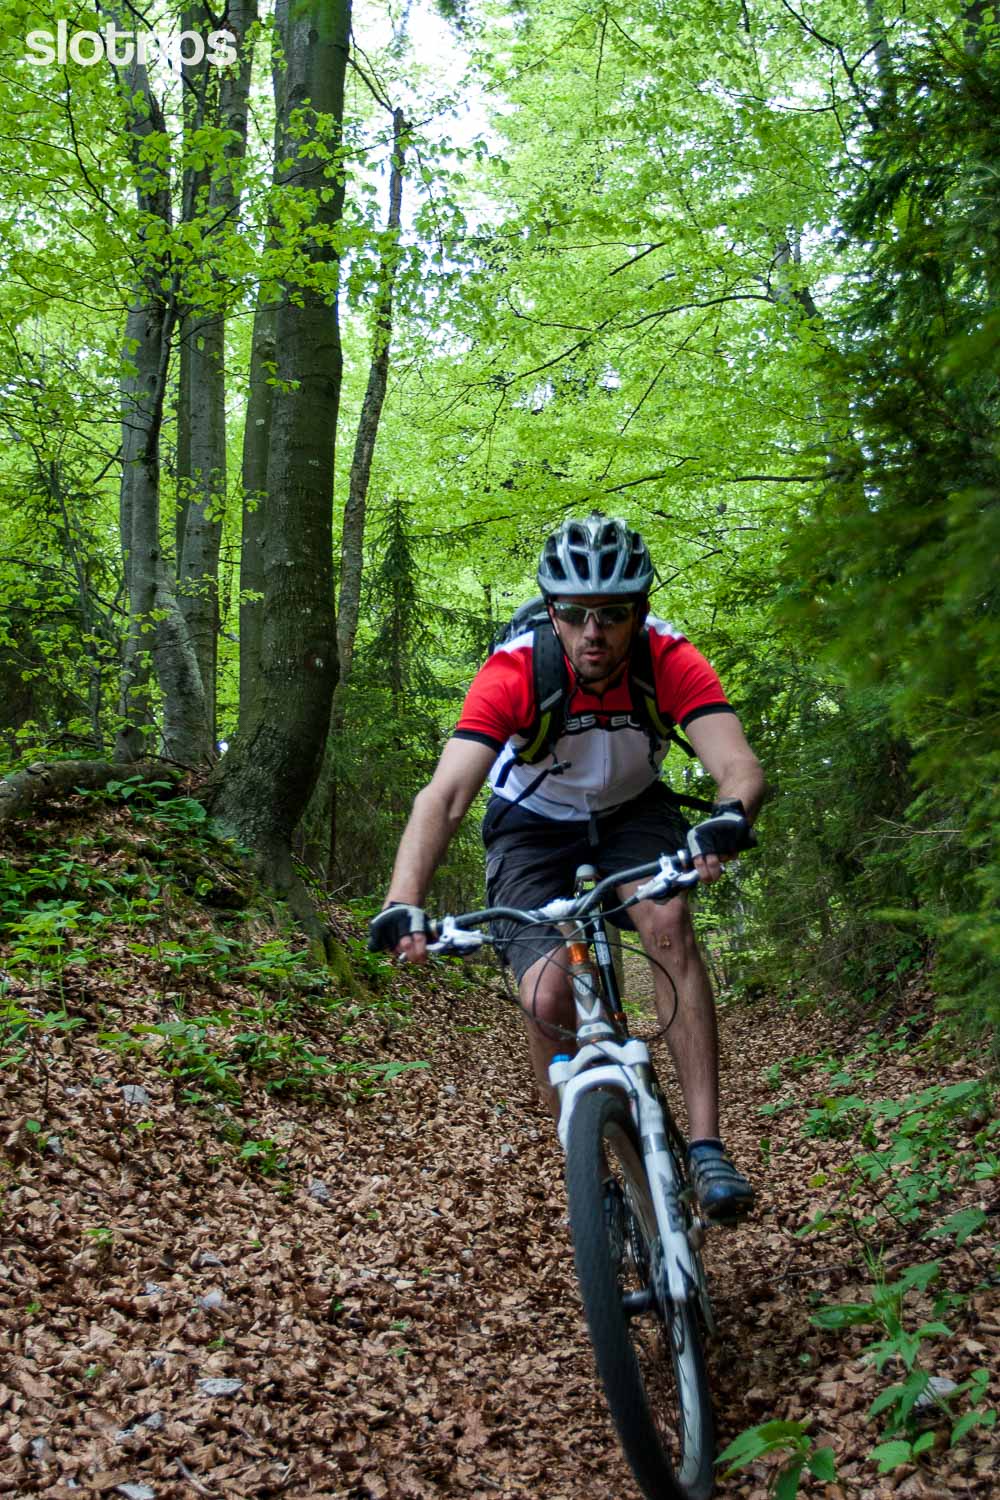 A mountain biker descending on a fast forest road through forests around Ljubljana city centre, Slovenia